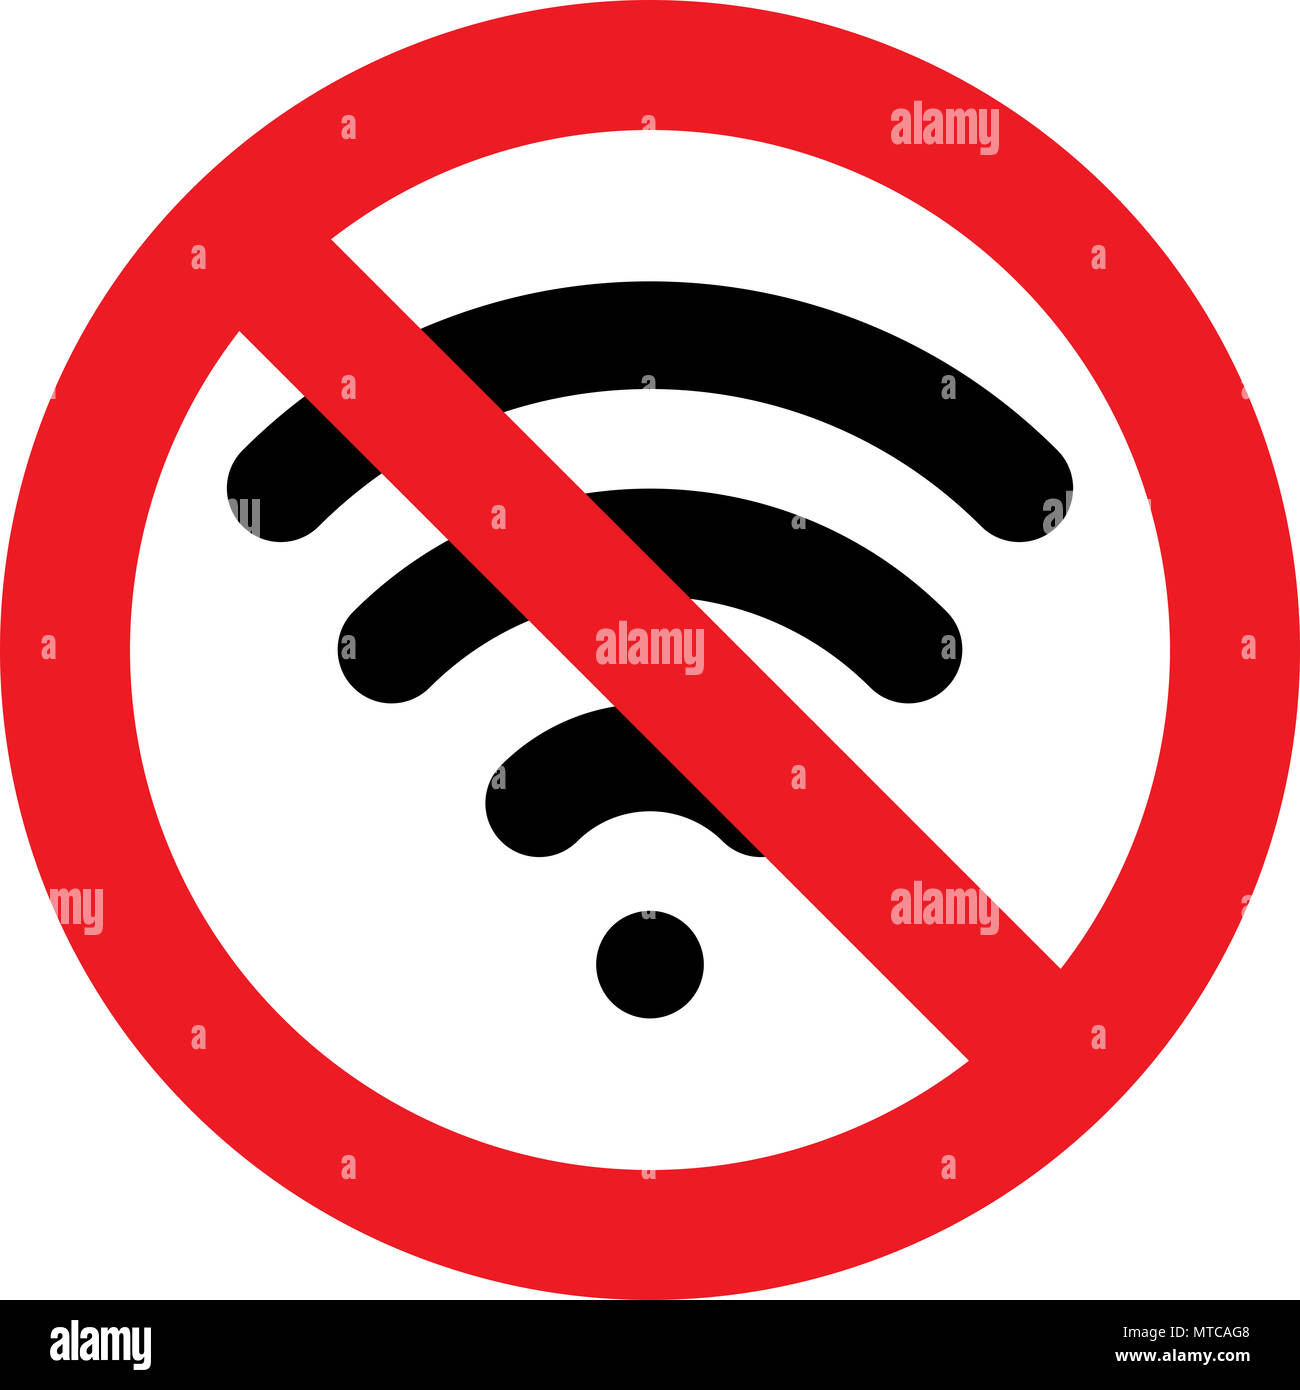 No wireless connection allowed sign Stock Photo